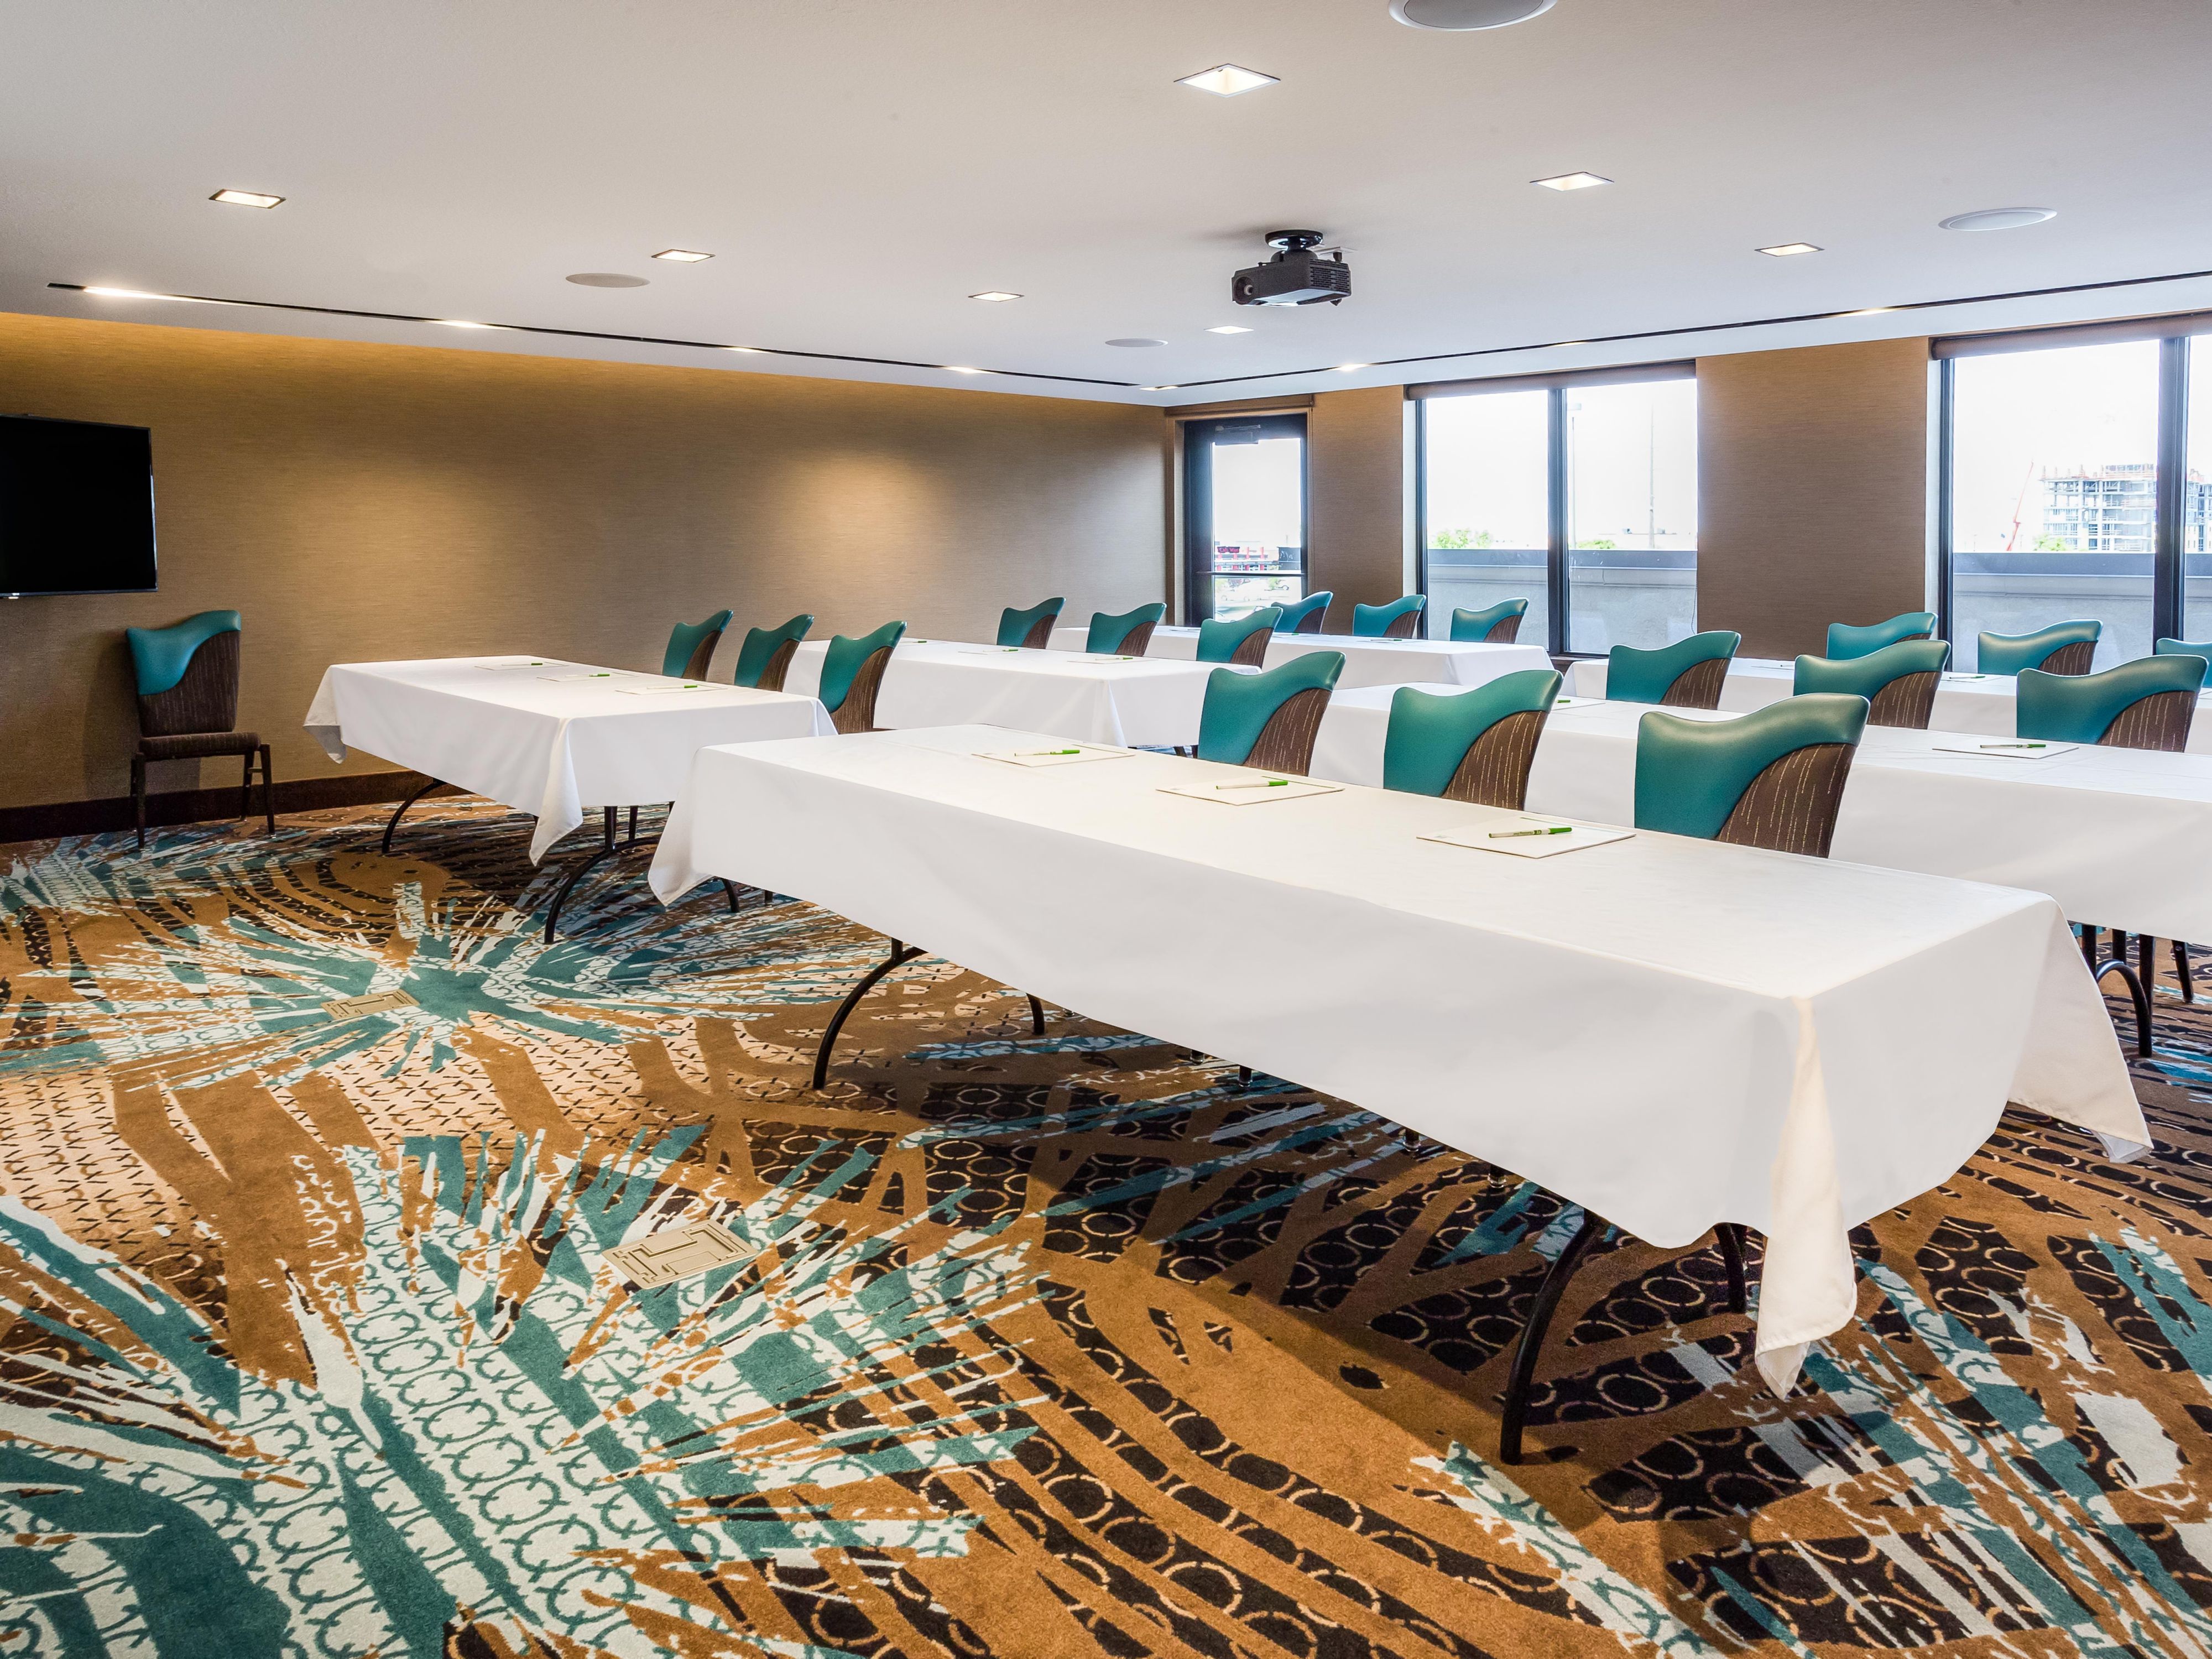 If you are attending a event at the Mountain America Expo Center, stay with us for great rates for yourself or for your group? We are only a two mile drive from the Expo Center. We offer group discounts in our newly renovated hotel, along with great amenities for all your group!